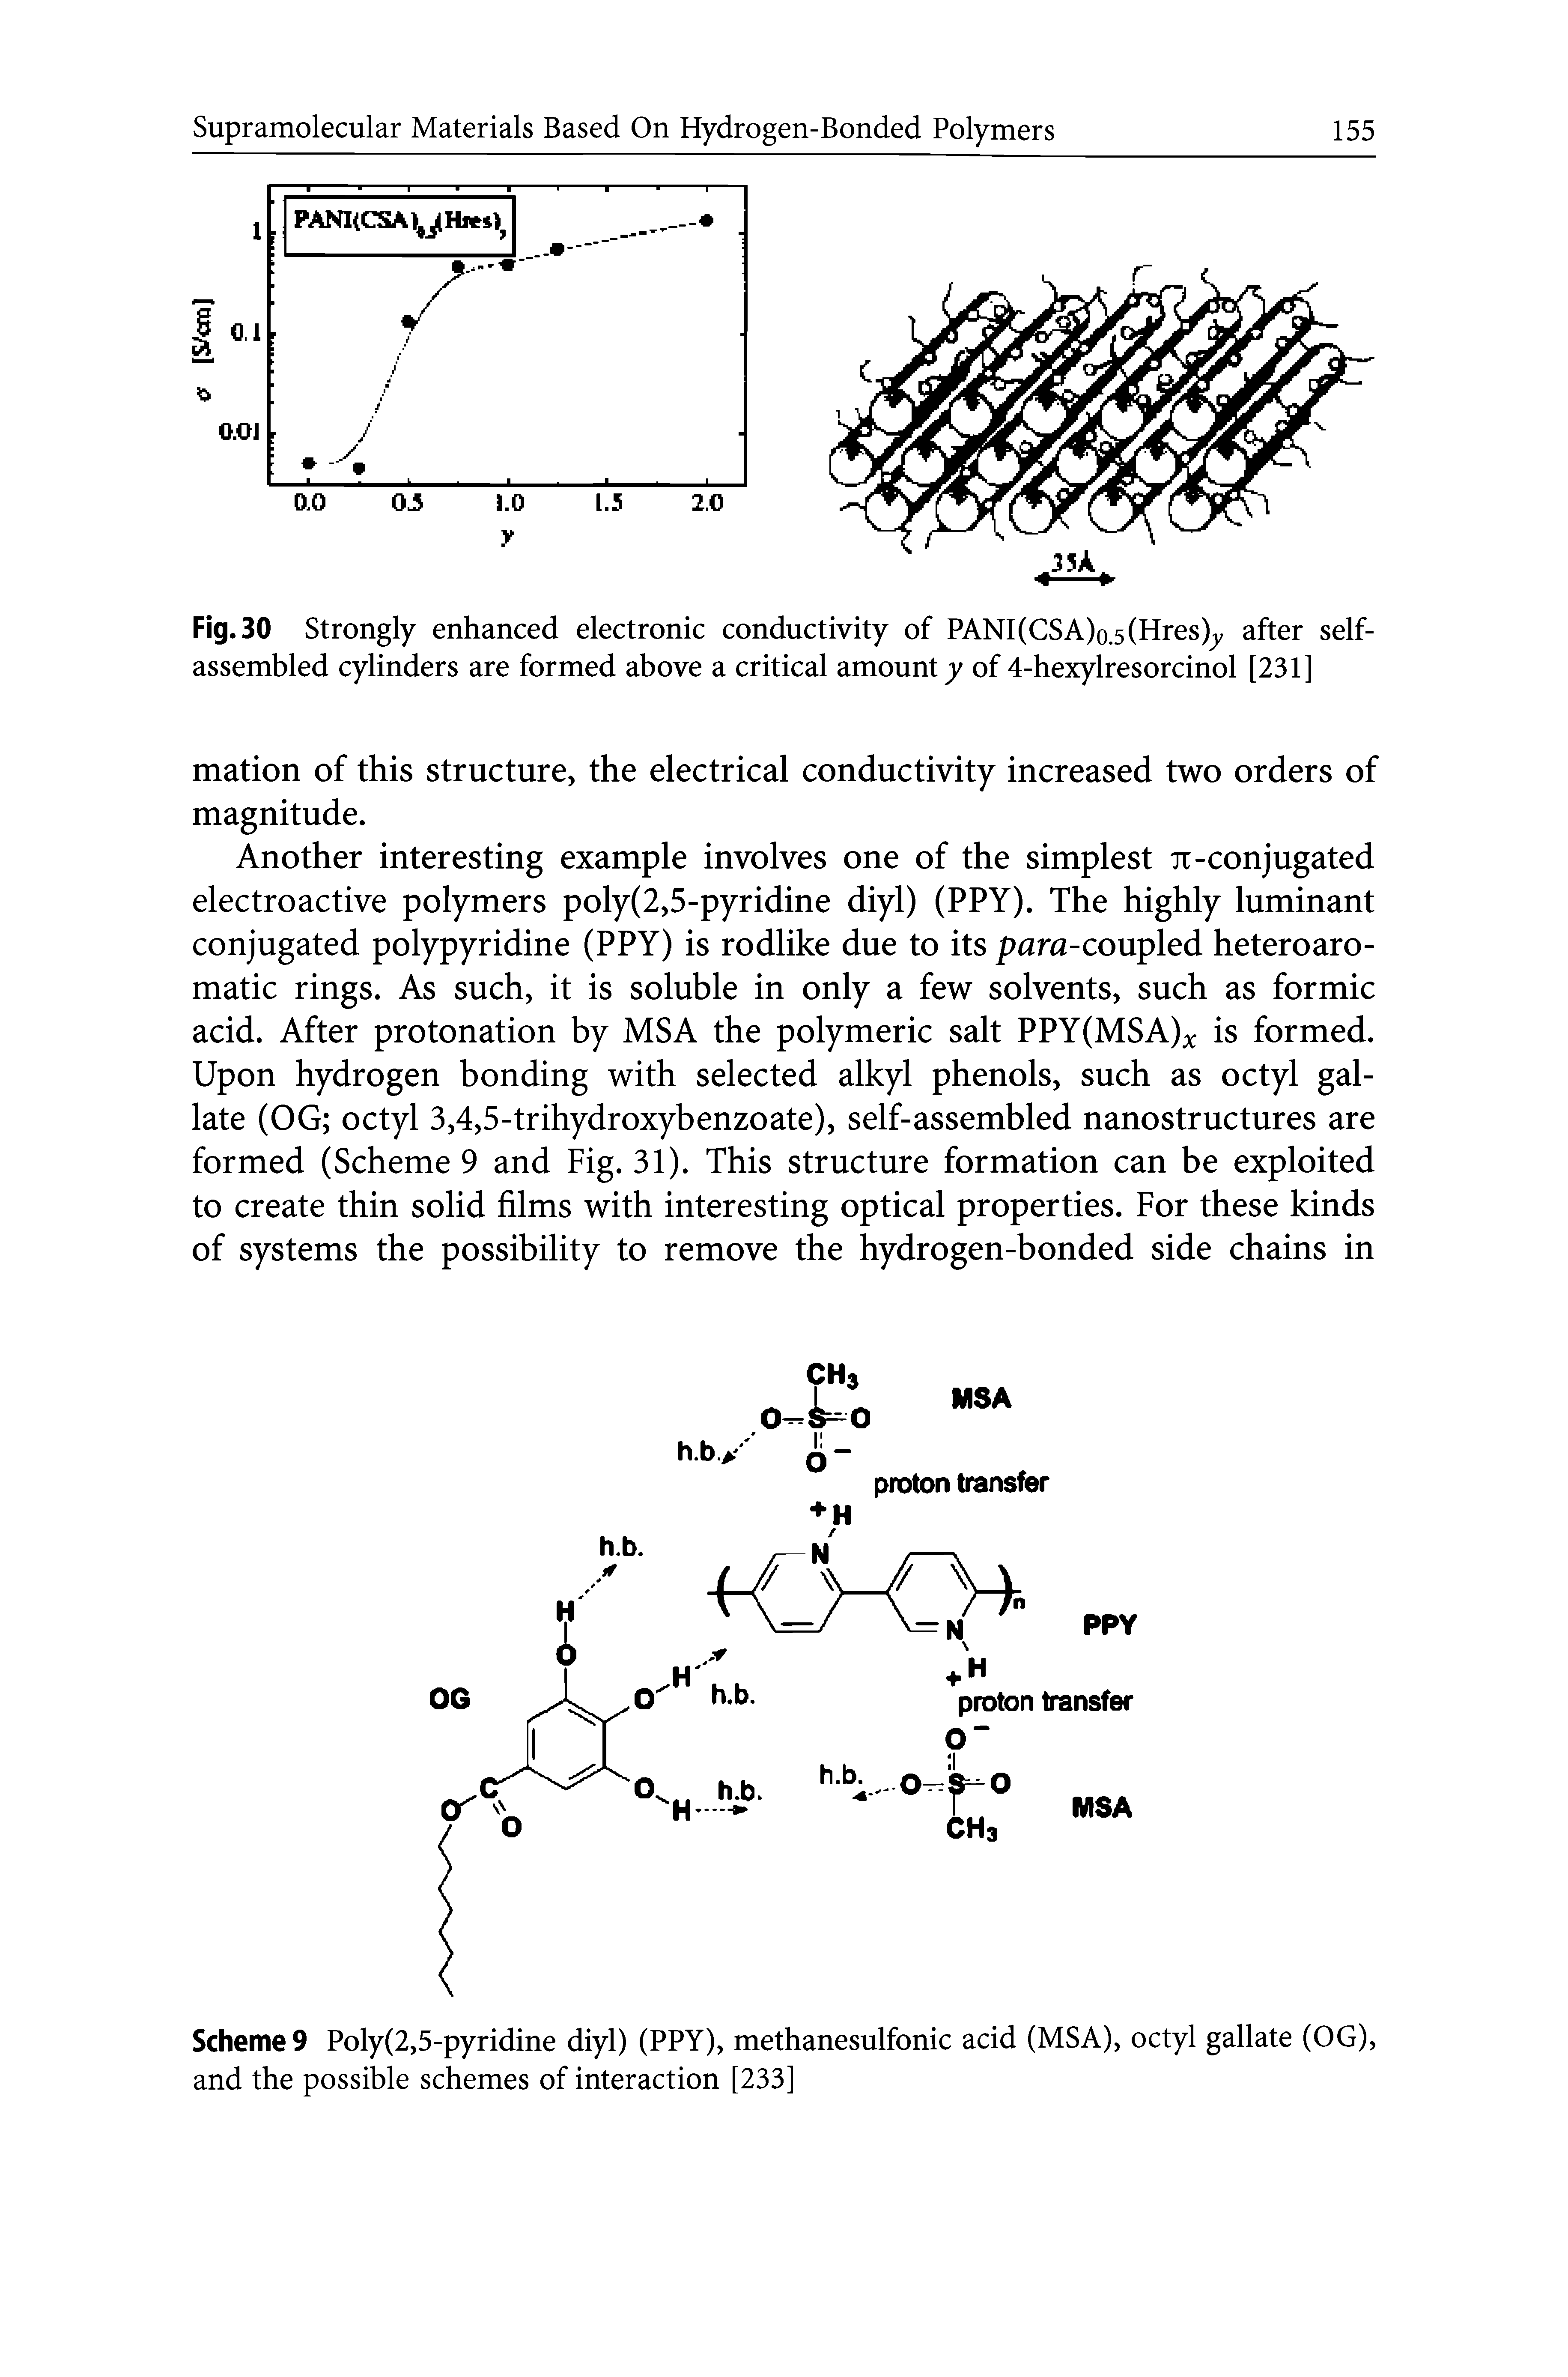 Scheme 9 Poly(2,5-pyridine diyl) (PPY), methanesulfonic acid (MSA), octyl gallate (OG), and the possible schemes of interaction [233]...